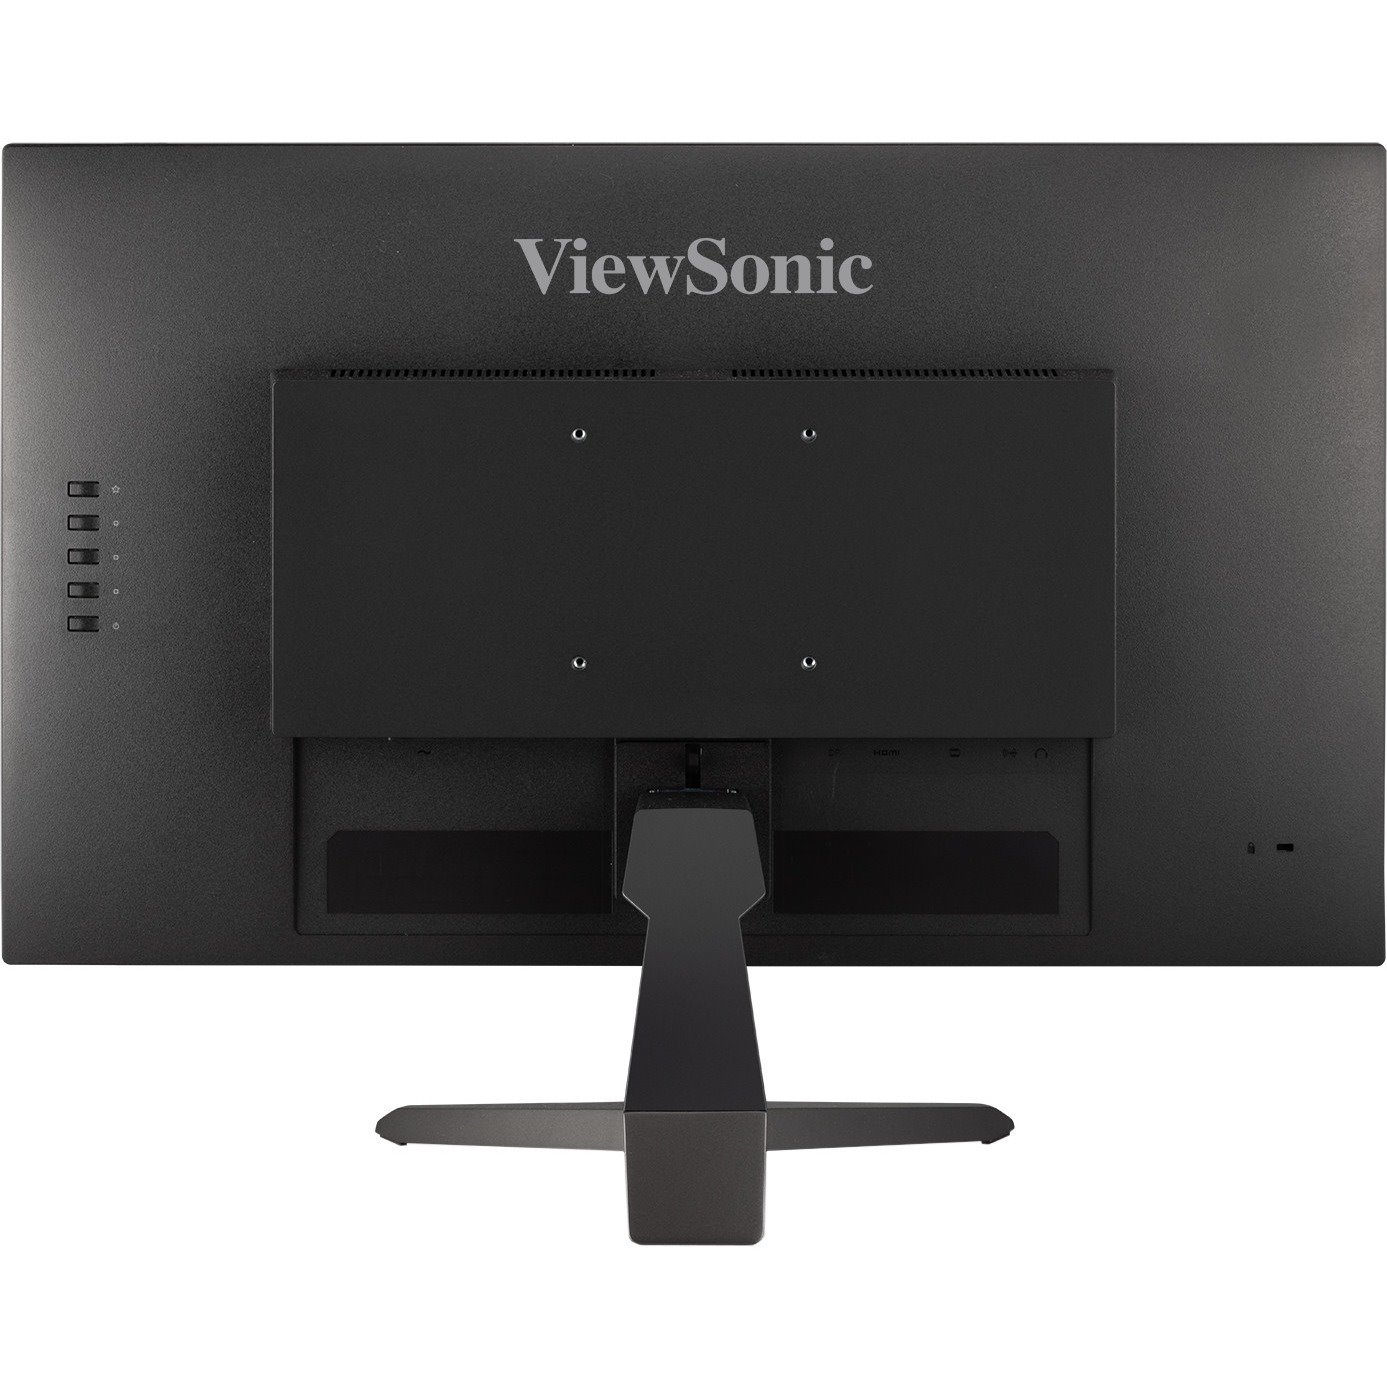 ViewSonic VX2767-MHD 27 Inch 1080p Gaming Monitor with 100Hz, 1ms, Ultra-Thin Bezels, FreeSync, Eye Care, HDMI, VGA, and DP